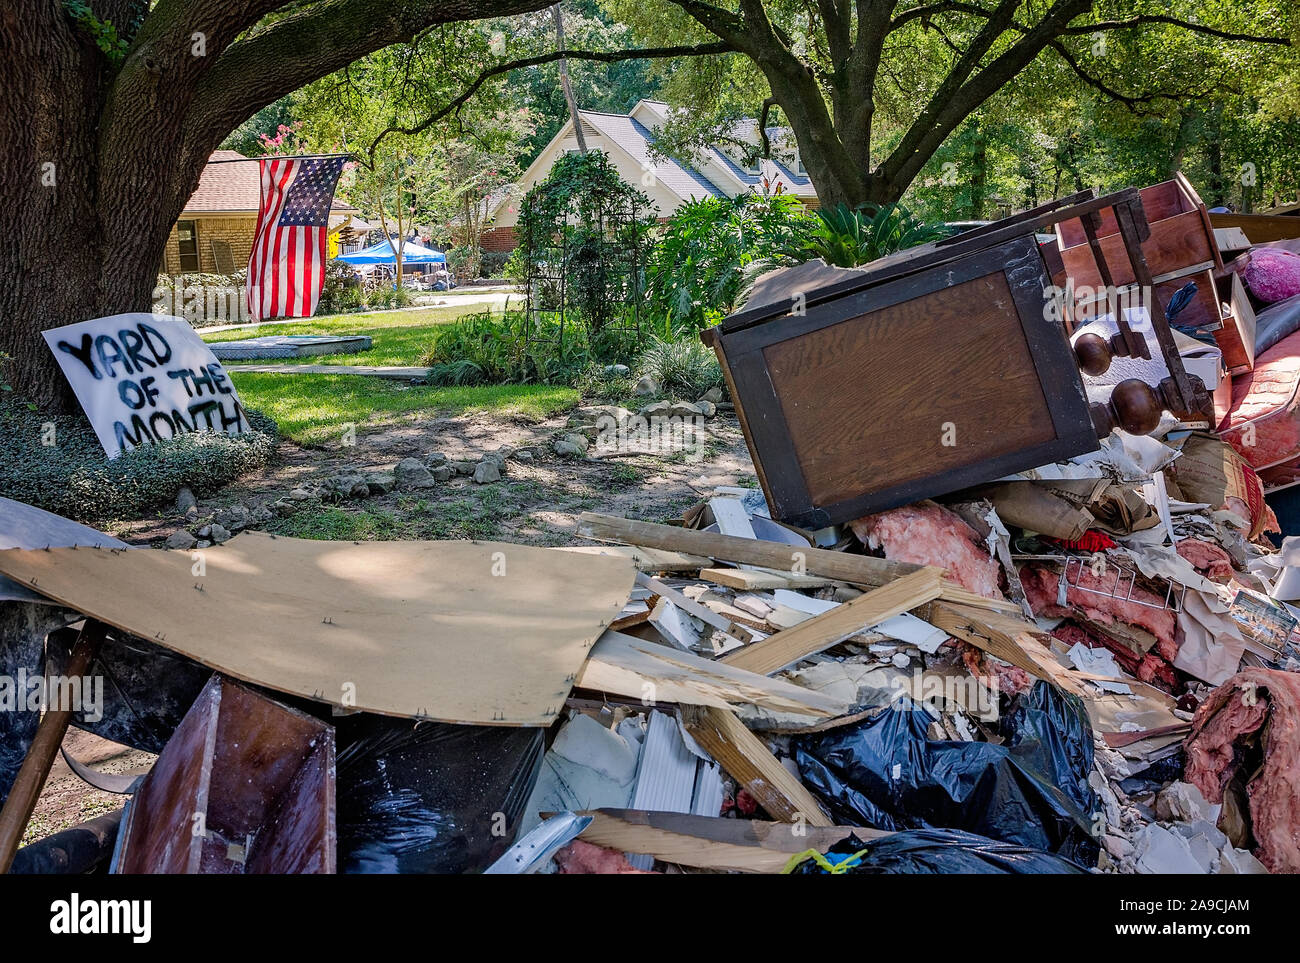 A “Yard of the Month” sign, nearly obscured by flood debris from Hurricane Harvey, leans against a tree, Sept. 6, 2017, in Houston, Texas. Stock Photo